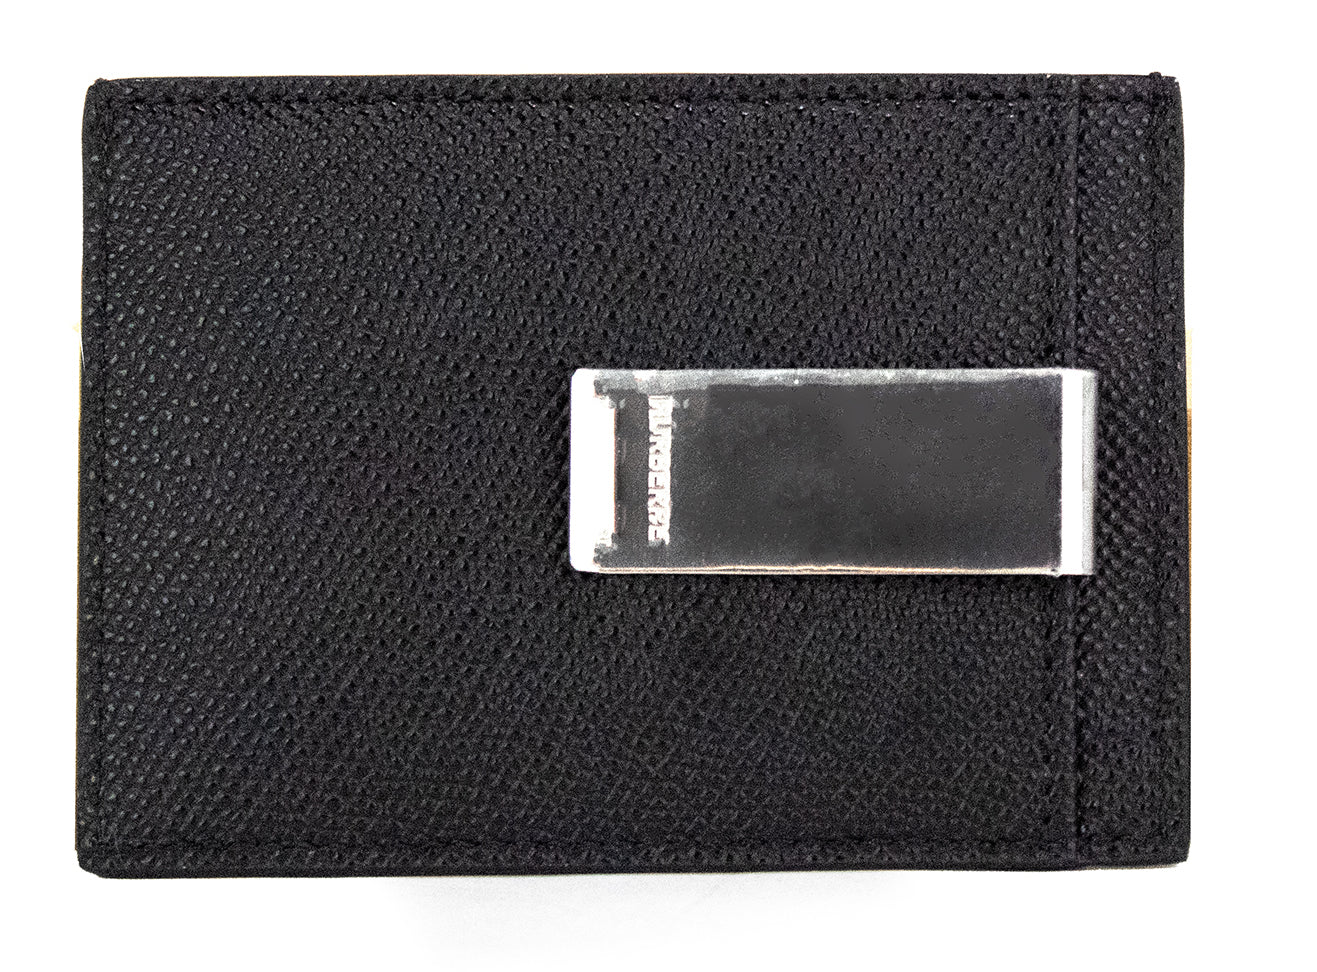 Burberry Chase Business Small Black Grained Leather Money Clip Card Case Wallet